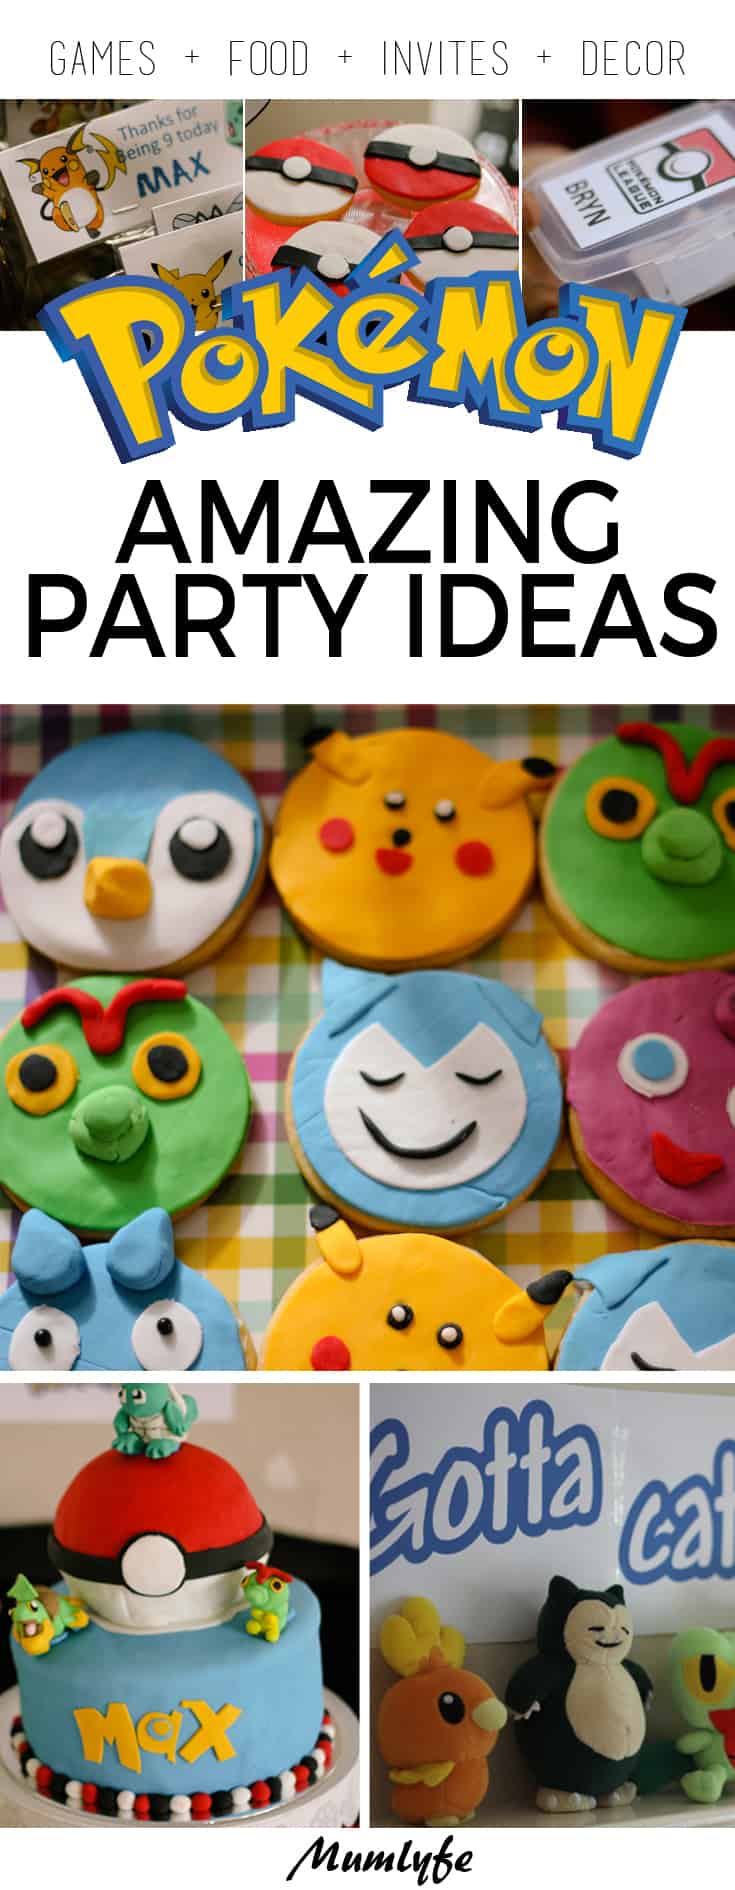 Pokemon party ideas that are so much fun